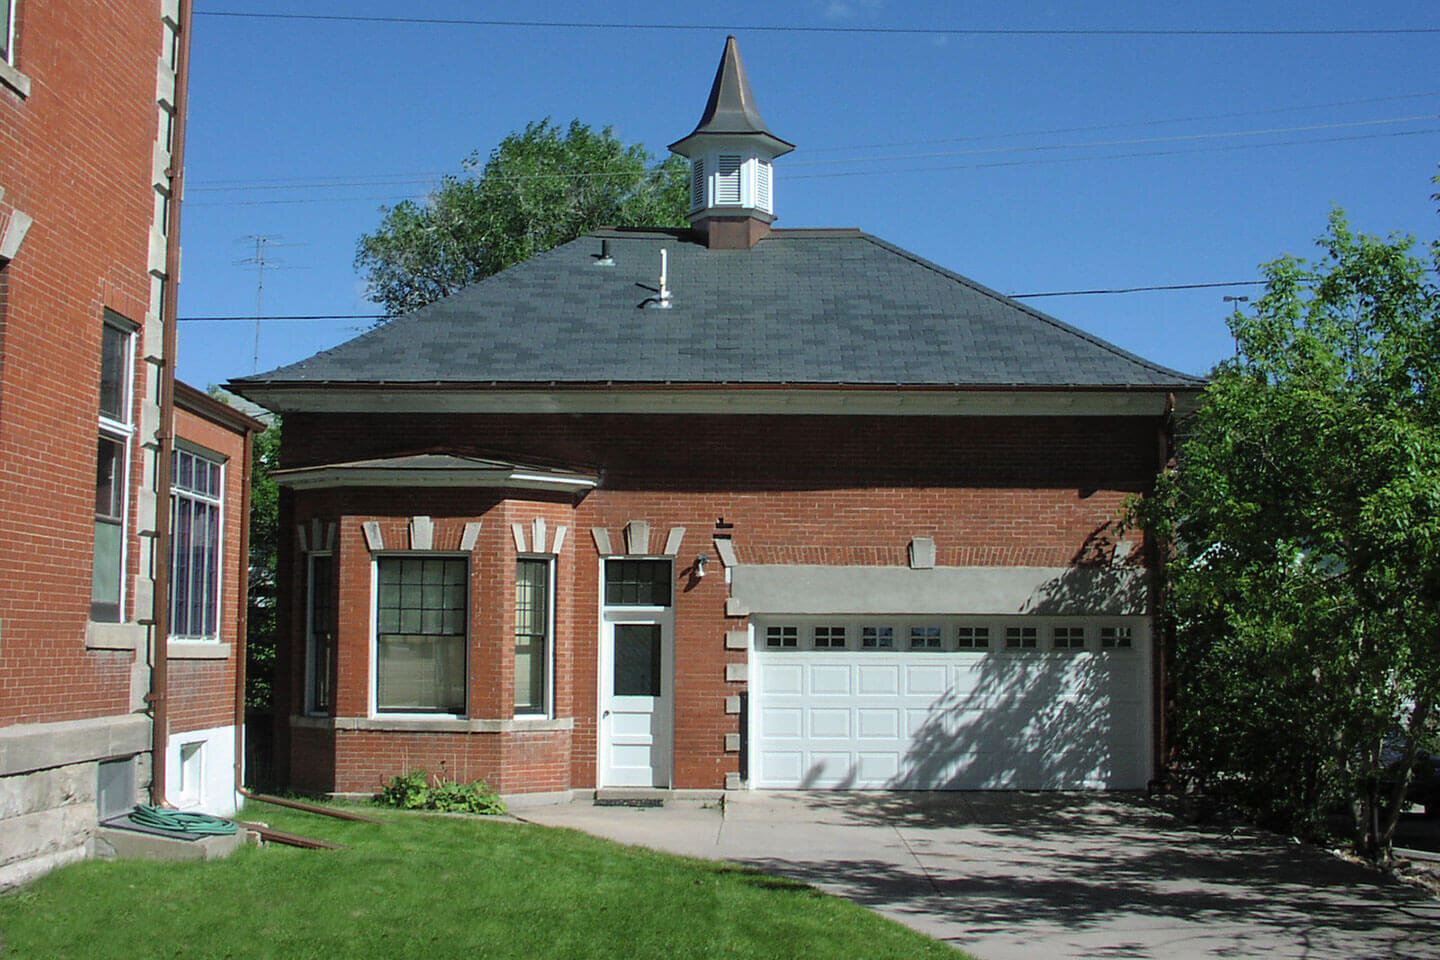 Red brick carriage house with turret